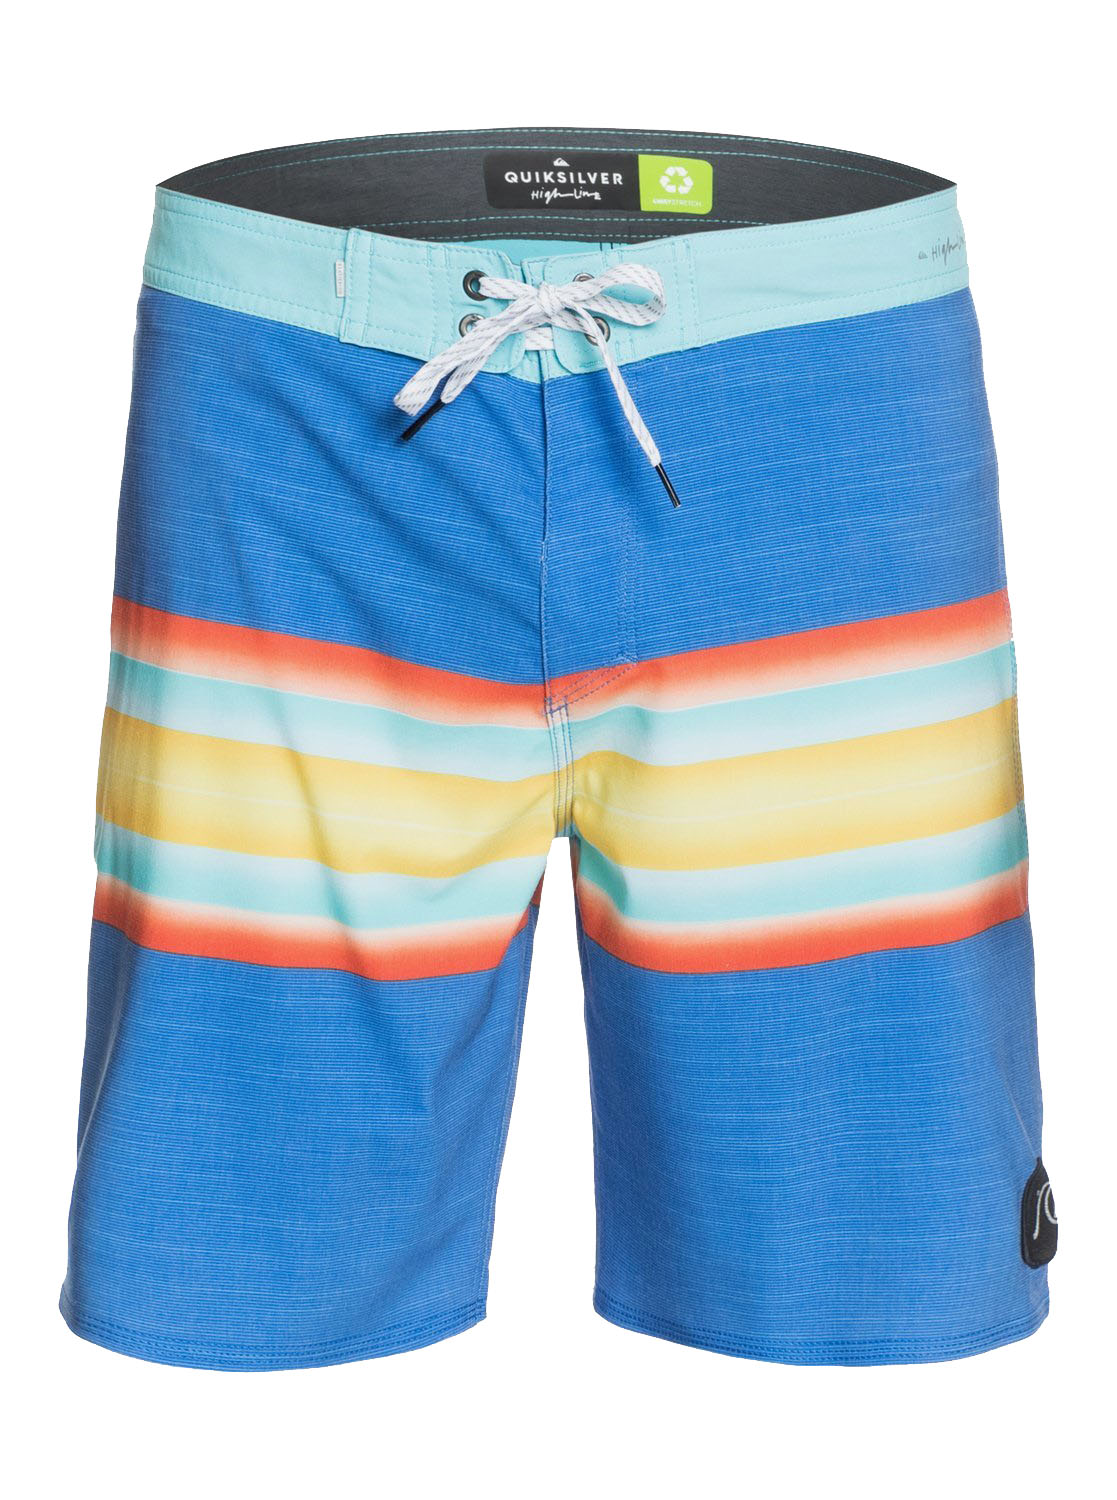 Quiksilver Highline Six Channel Boardshorts